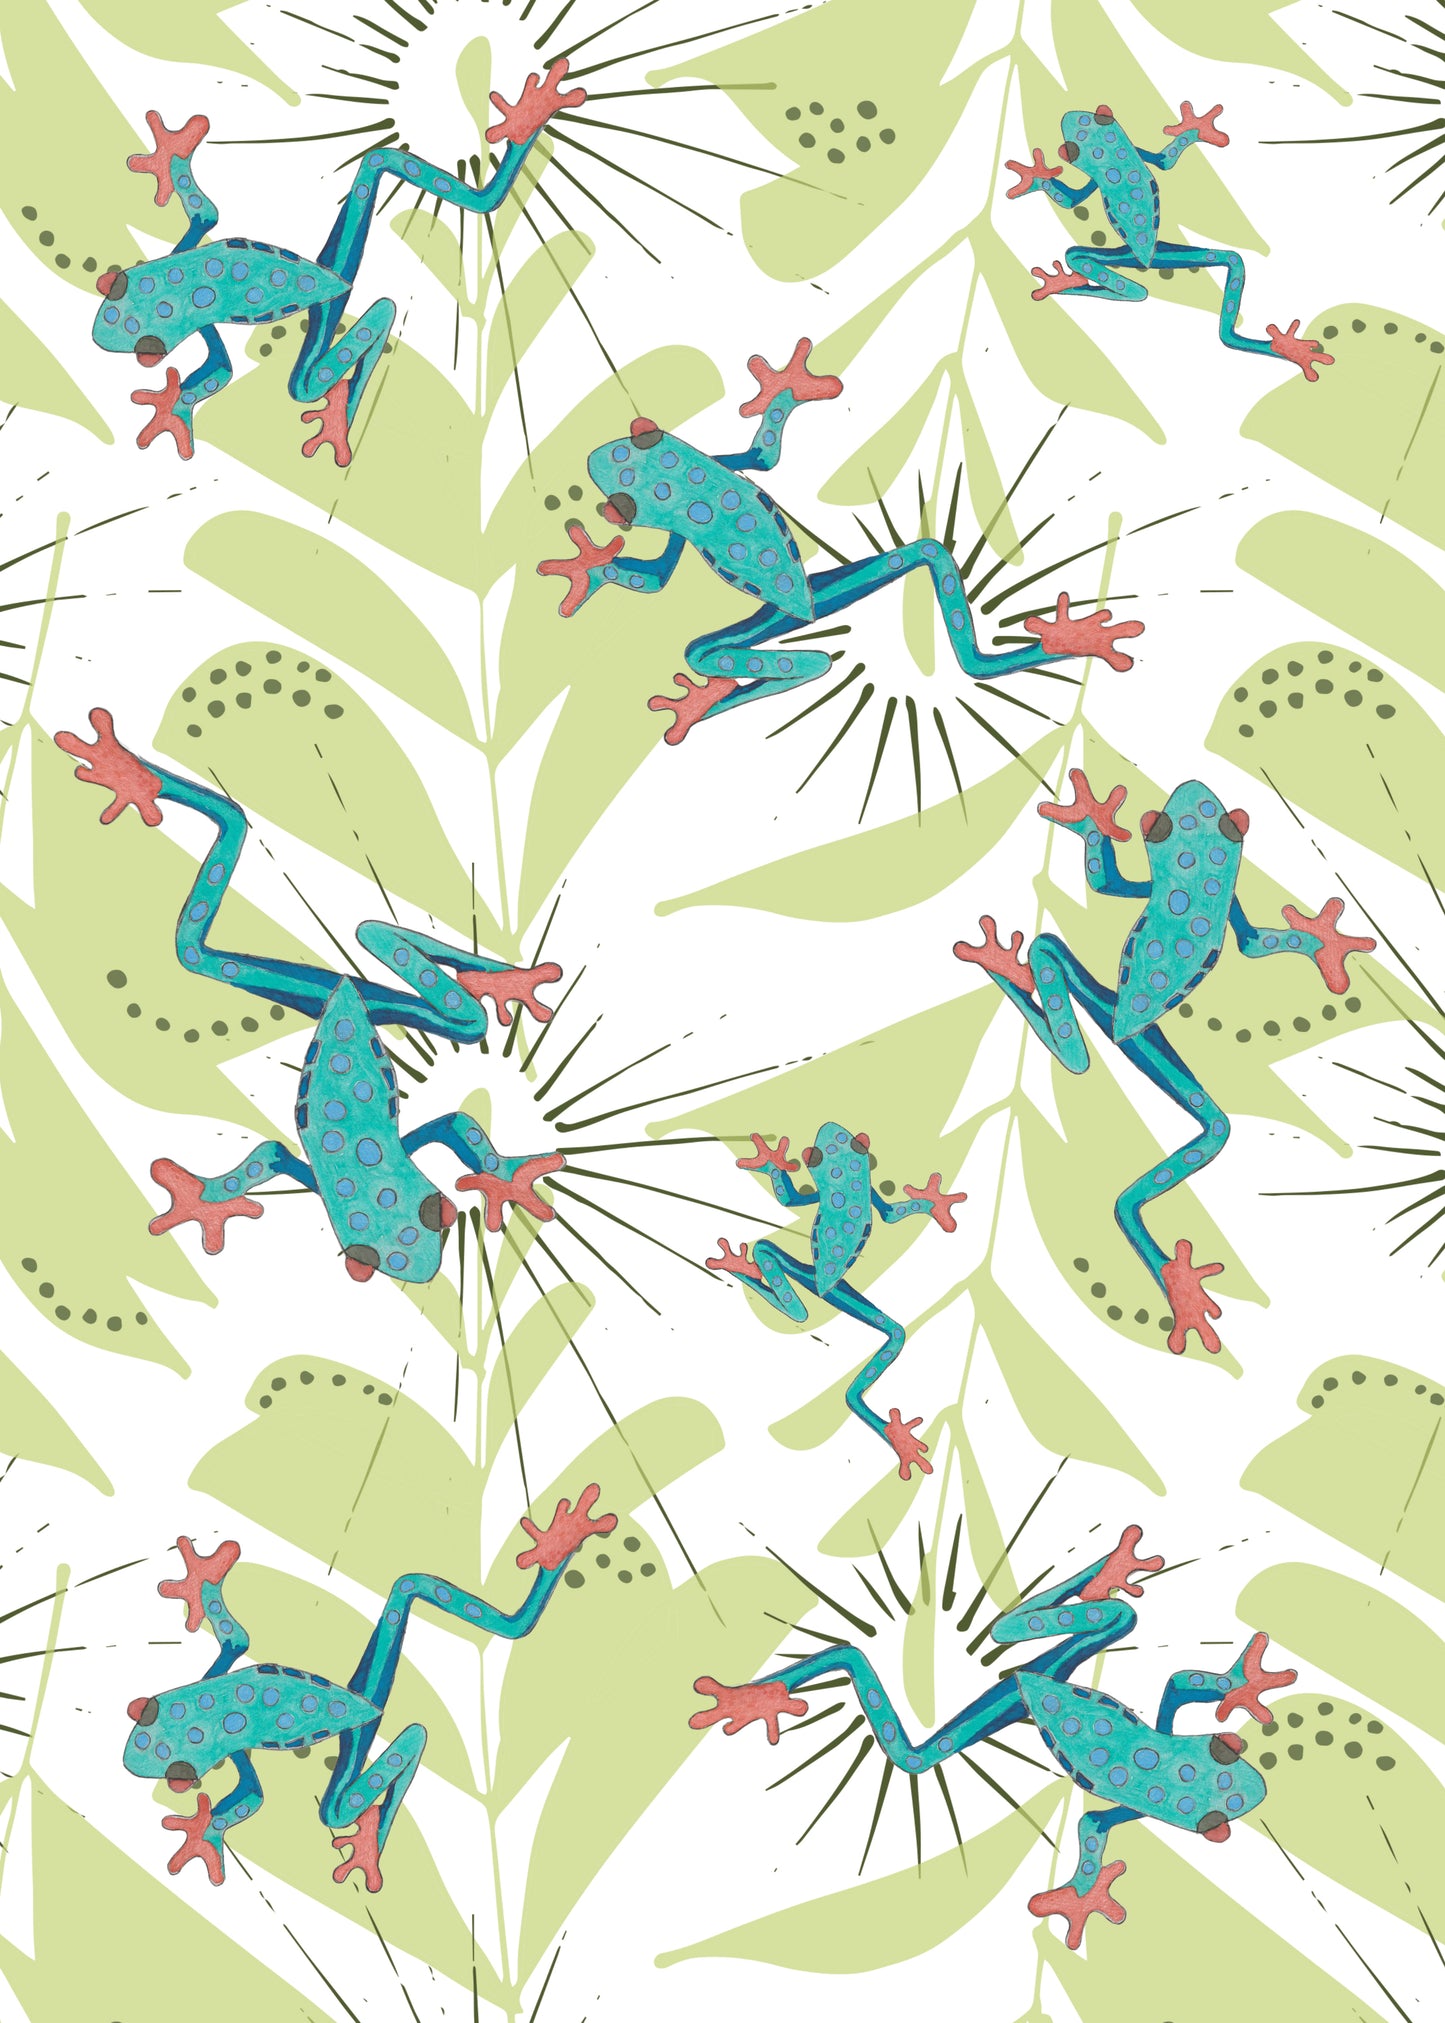 Frogs & Ferns - Set of 4 coasters (2 designs)